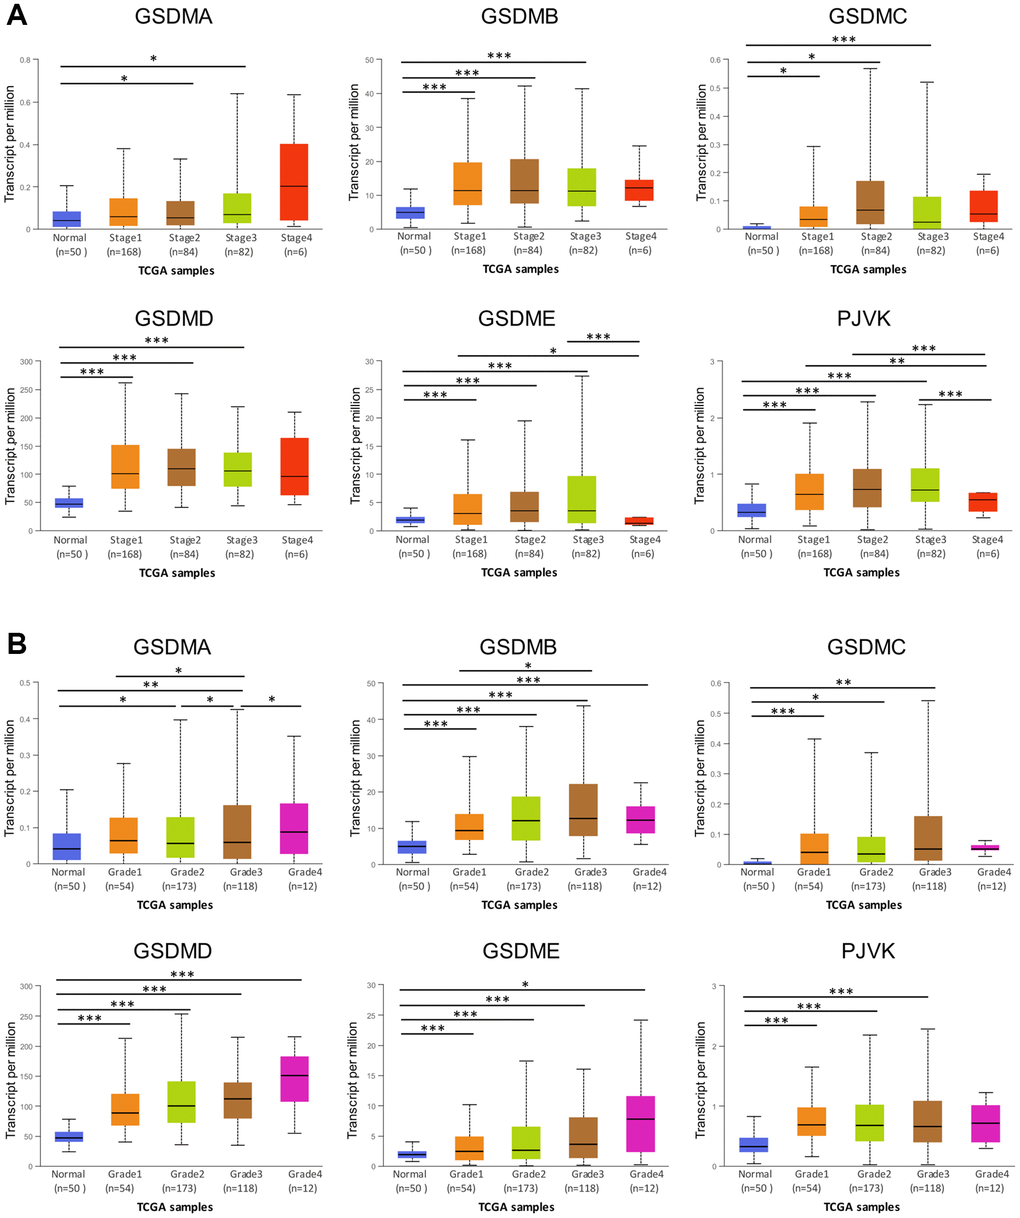 Association of GSDMs mRNA expression levels with clinical pathology from UALCAN. (A) Relationships between GSDMs transcript levels and individual cancer stages of HCC. (B) Relationships between GSDMs transcript levels and tumor grades of HCC. *p **p ***p 